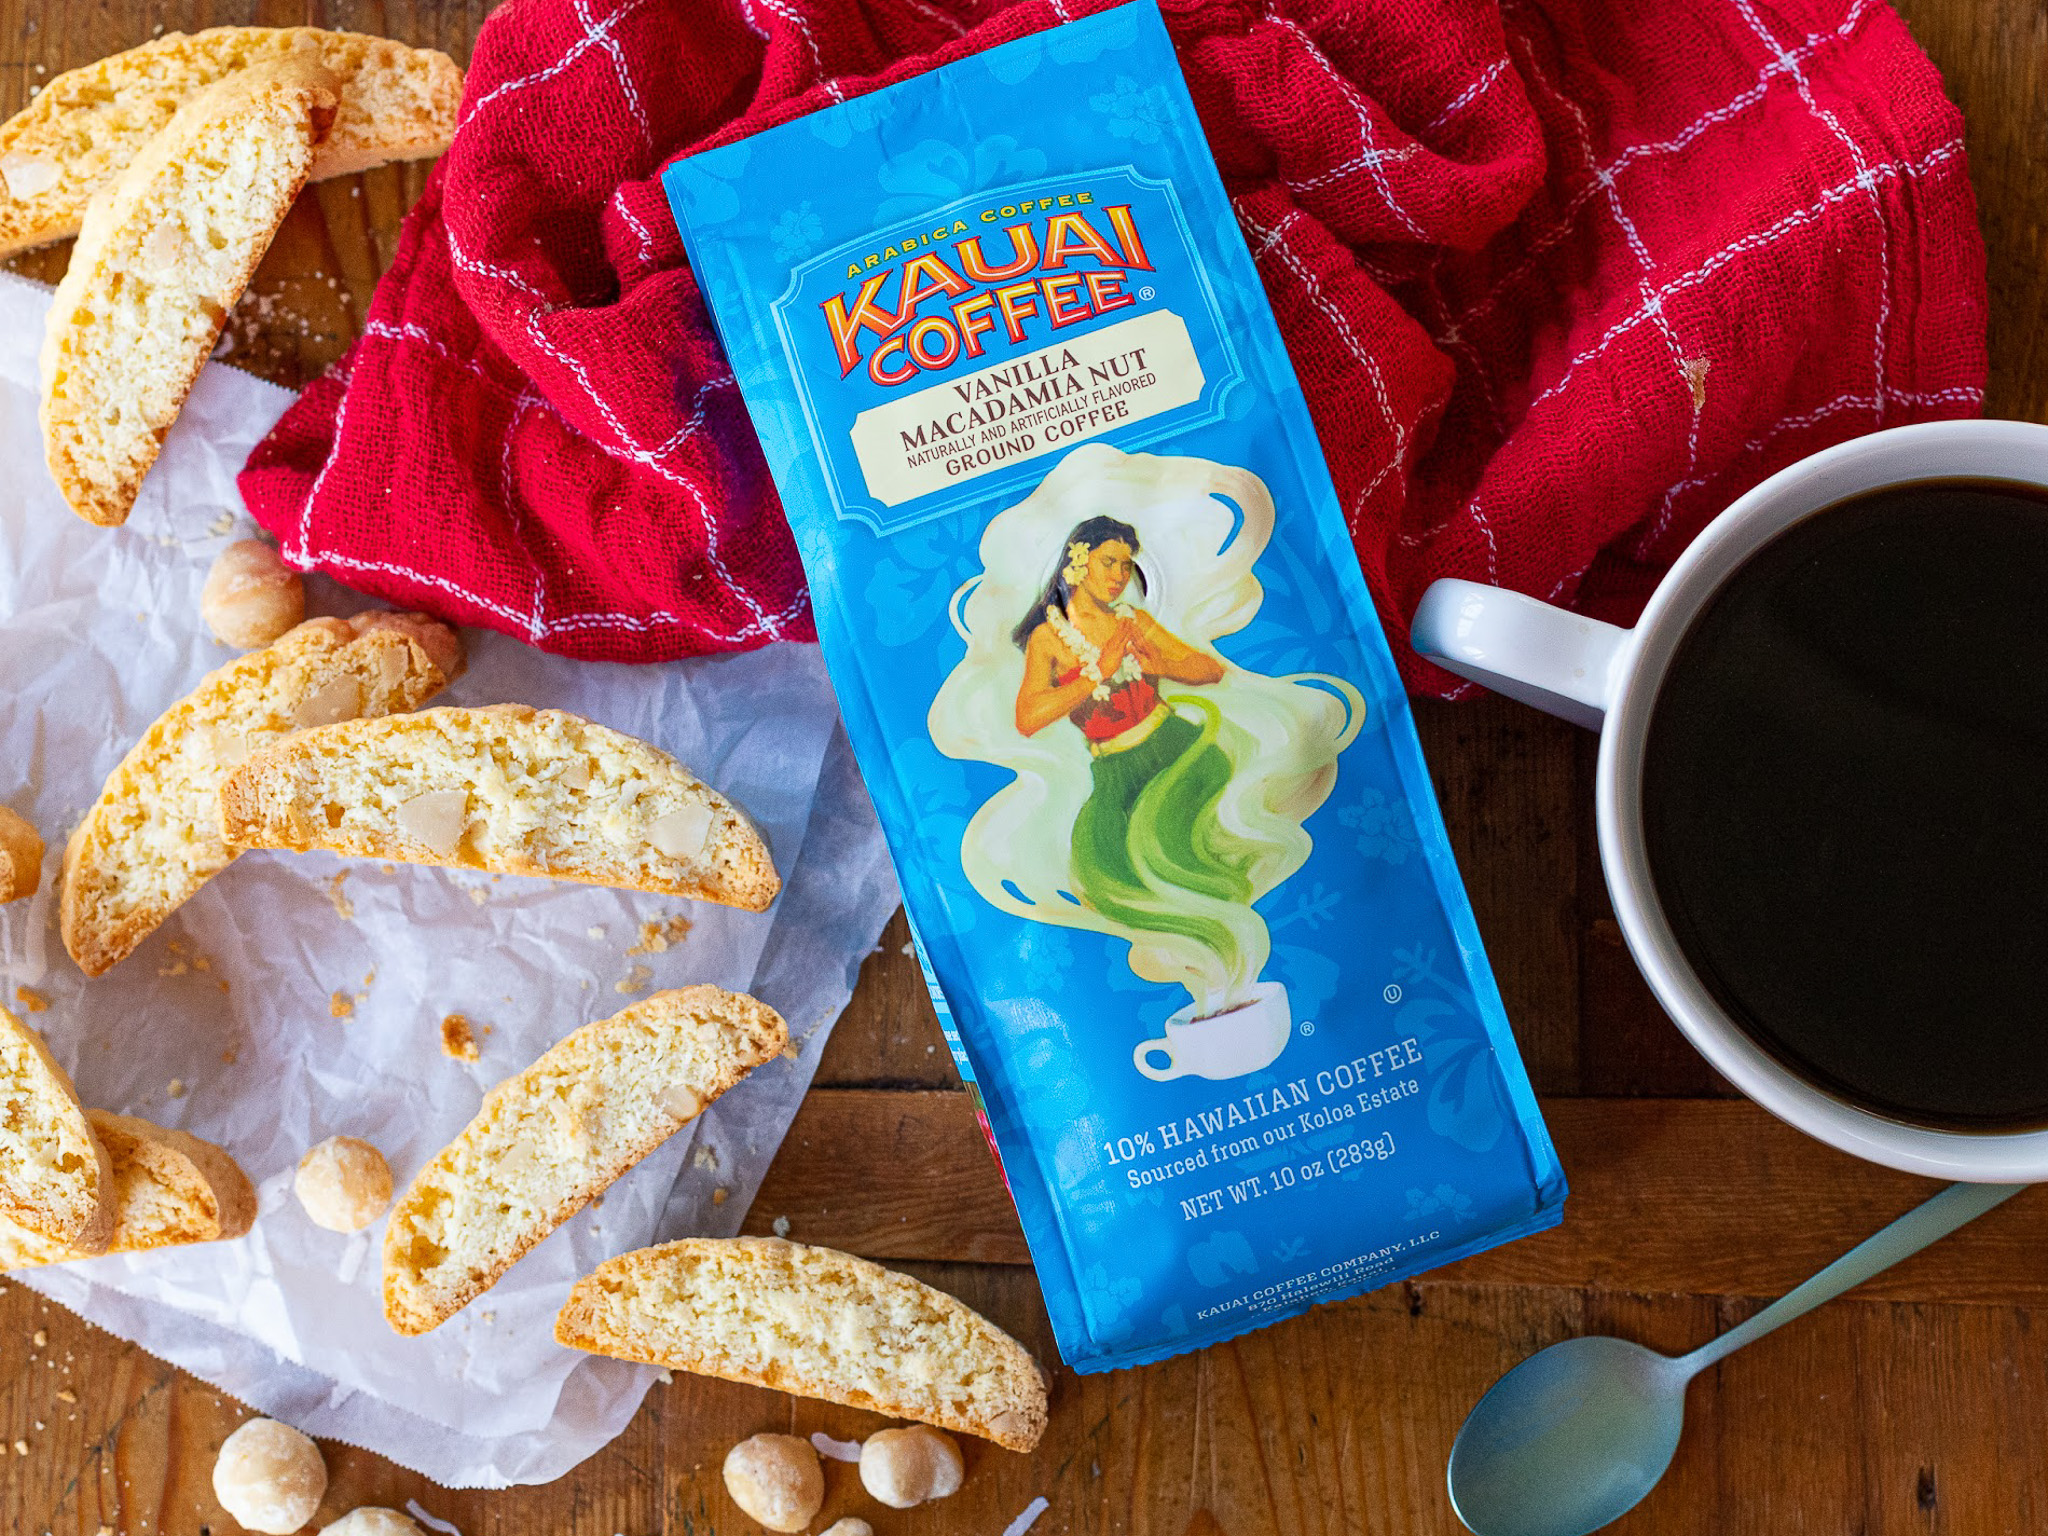 Grab A Deal On Kauai Coffee® At Publix – Enjoy With My Coconut Macadamia Biscotti